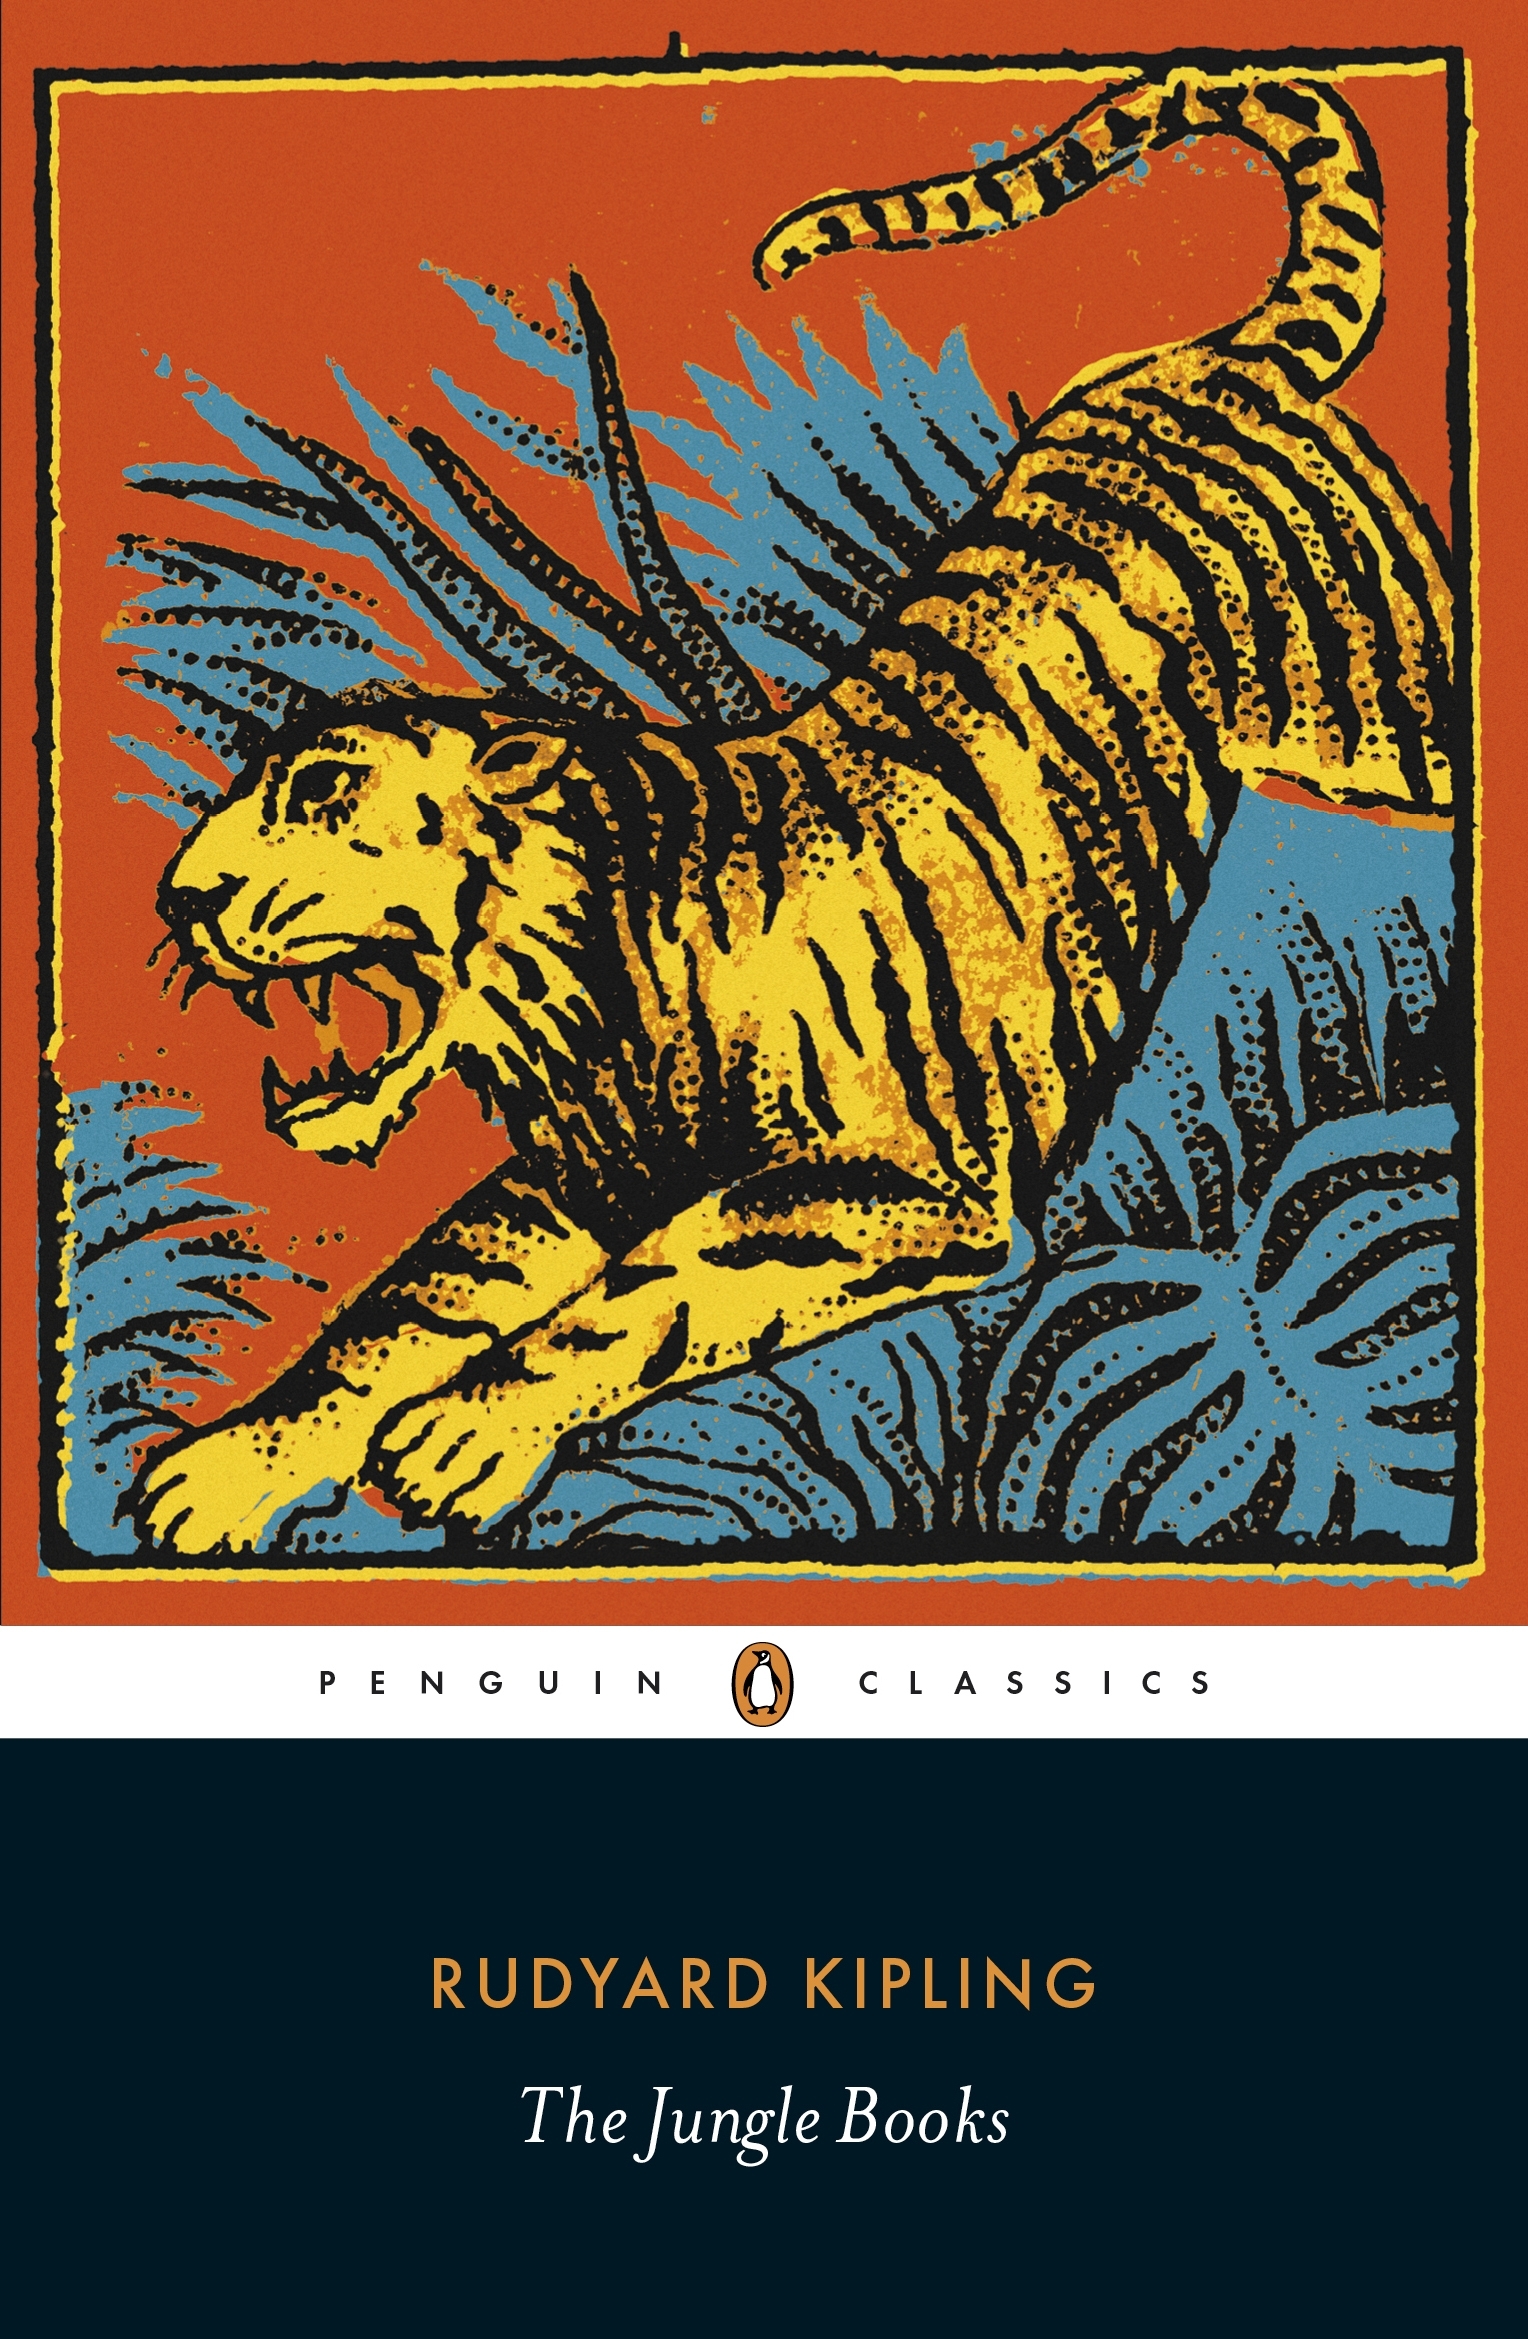 book review of the jungle book written by rudyard kipling